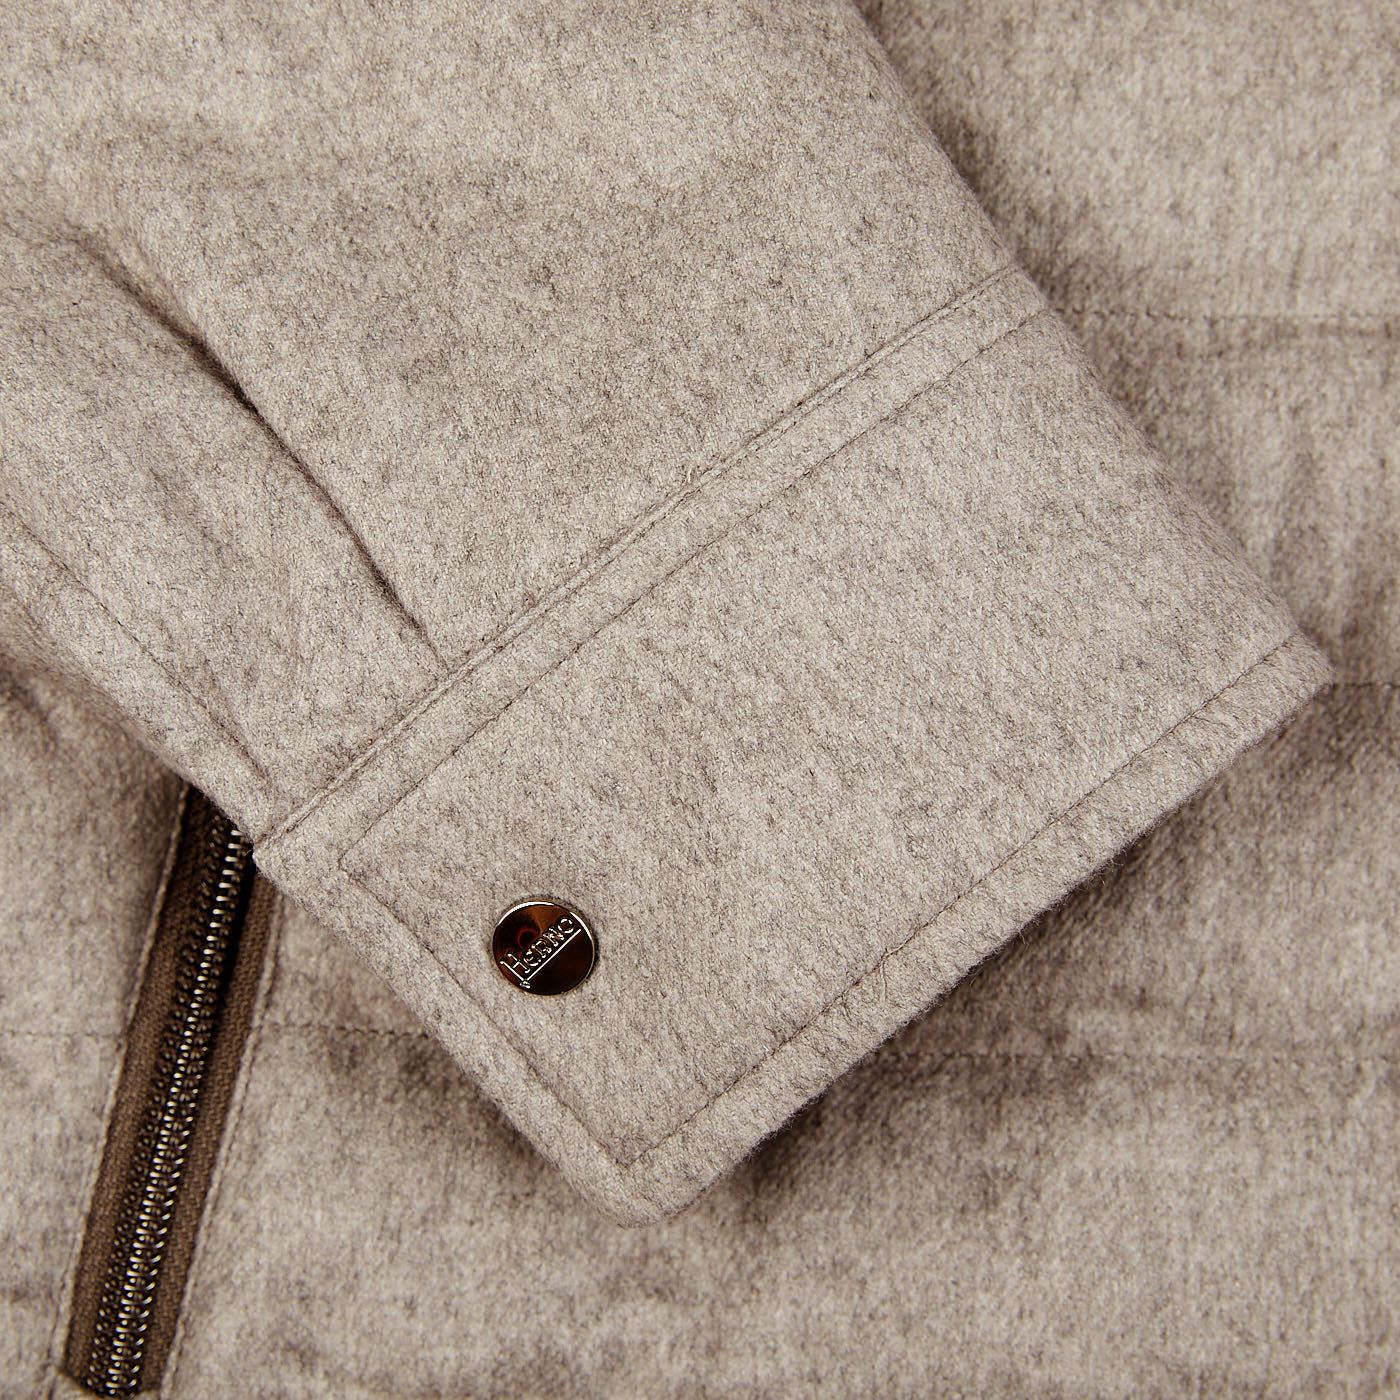 A Taupe Beige Silk Cashmere Water-Repellent Jacket with zippers by Herno.